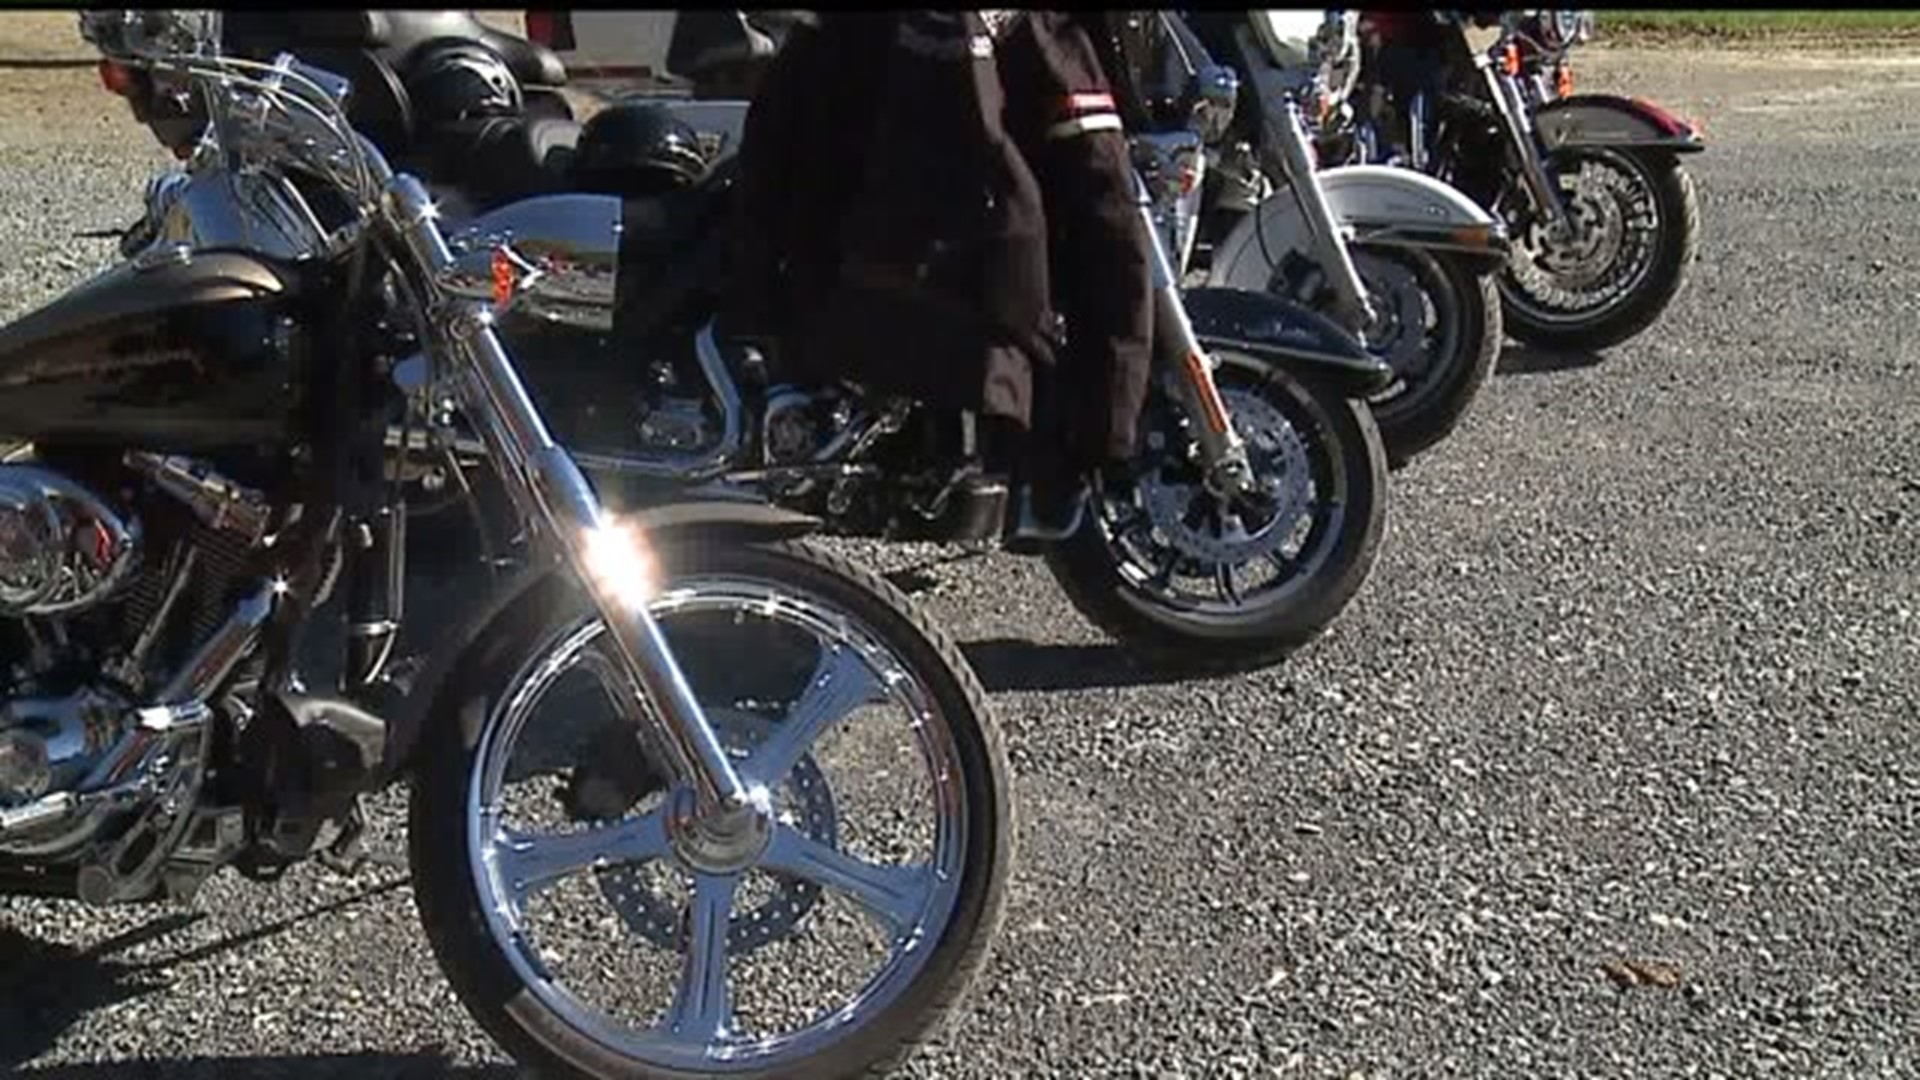 Bikers ride to benefit firefighter injured in line of duty